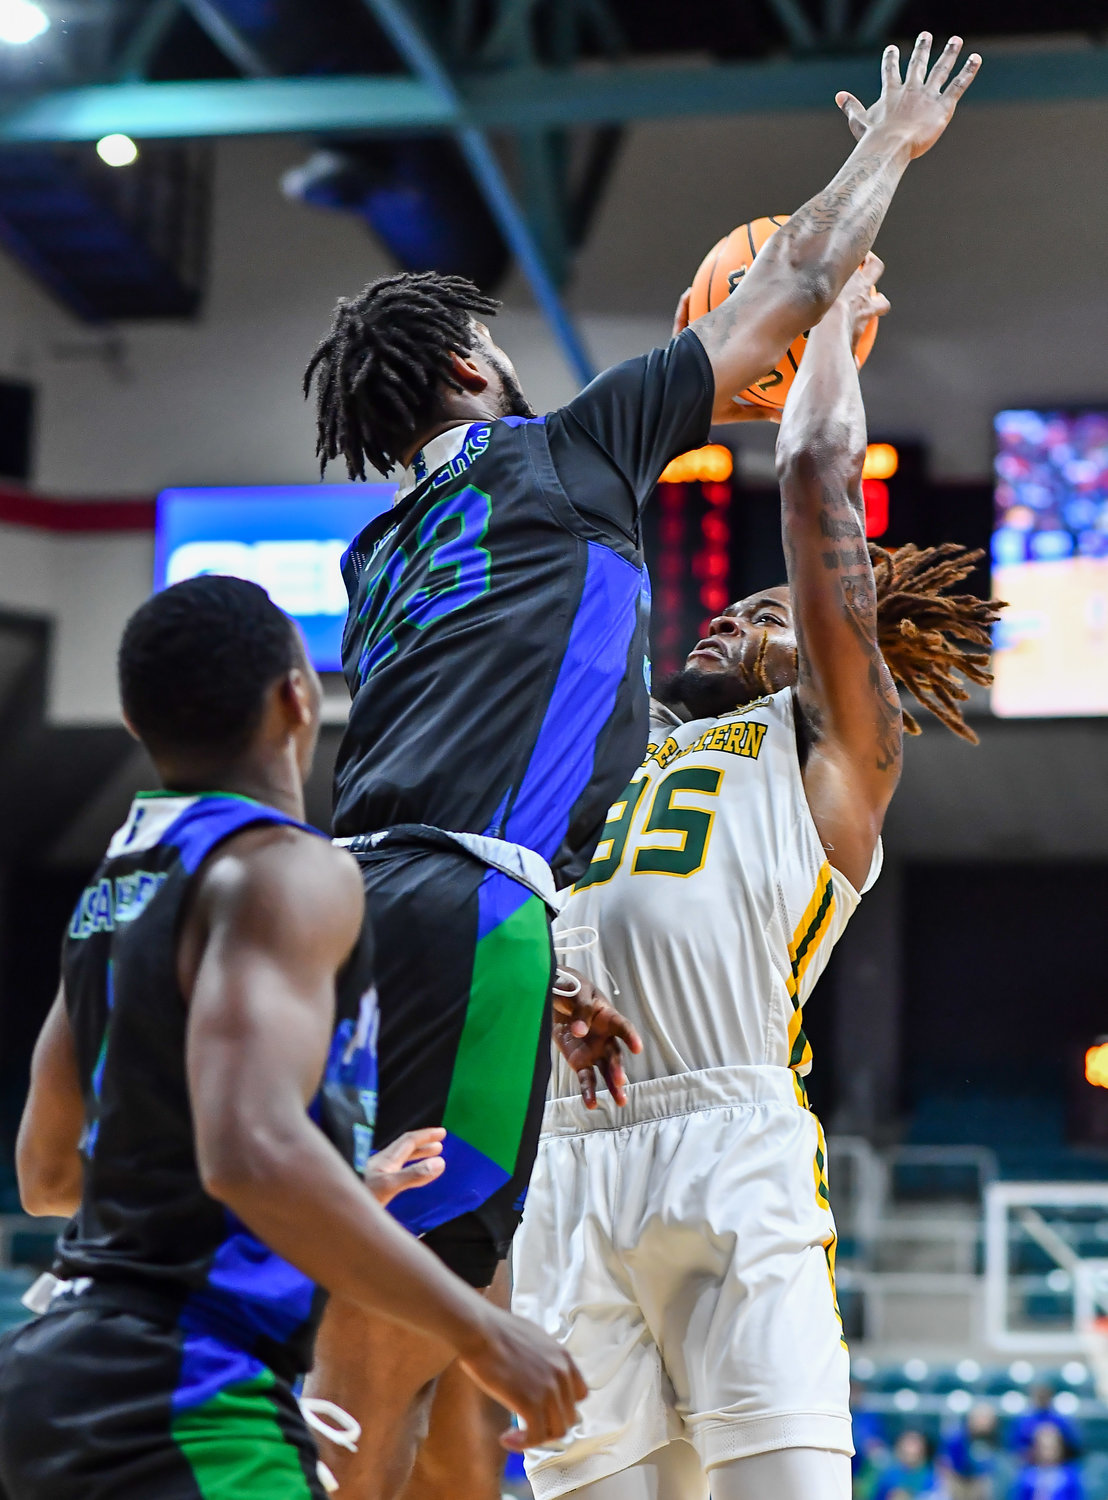 March 12,, 2022:   Southeastern Louisianas Gus Okafor #35 goes up for the shot guarded by A&M-Corpus Christis San Antonio Brinson #23 during the Southland Conference Basketball Championship game between A&M Corpus Christi vs Southeastern Louisiana. (Photo by Mark Goodman / Katy Times)